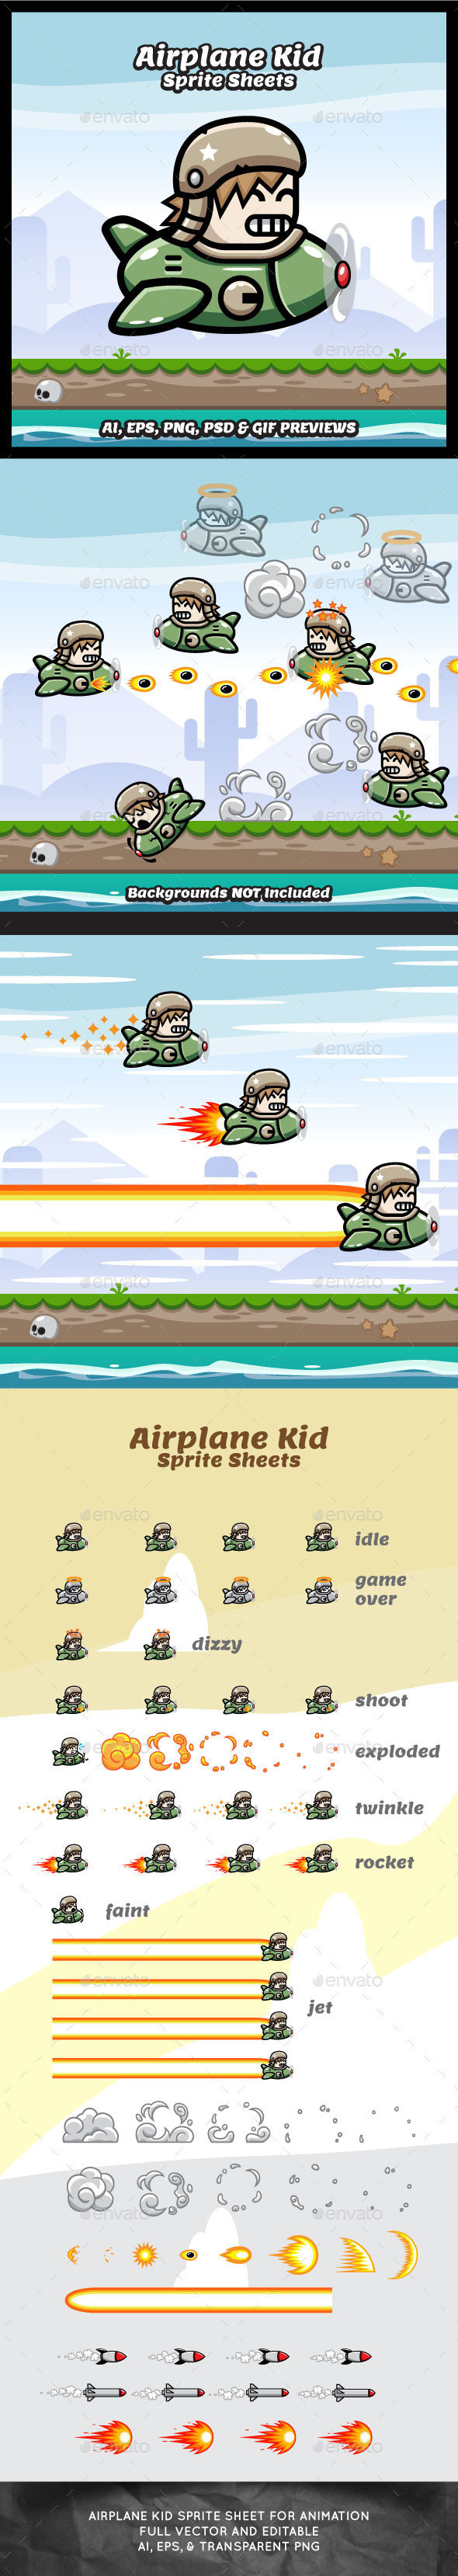 Airplane kid game character sprite sheet sidescroller game asset flying animation gui mobile games gameart game art 590